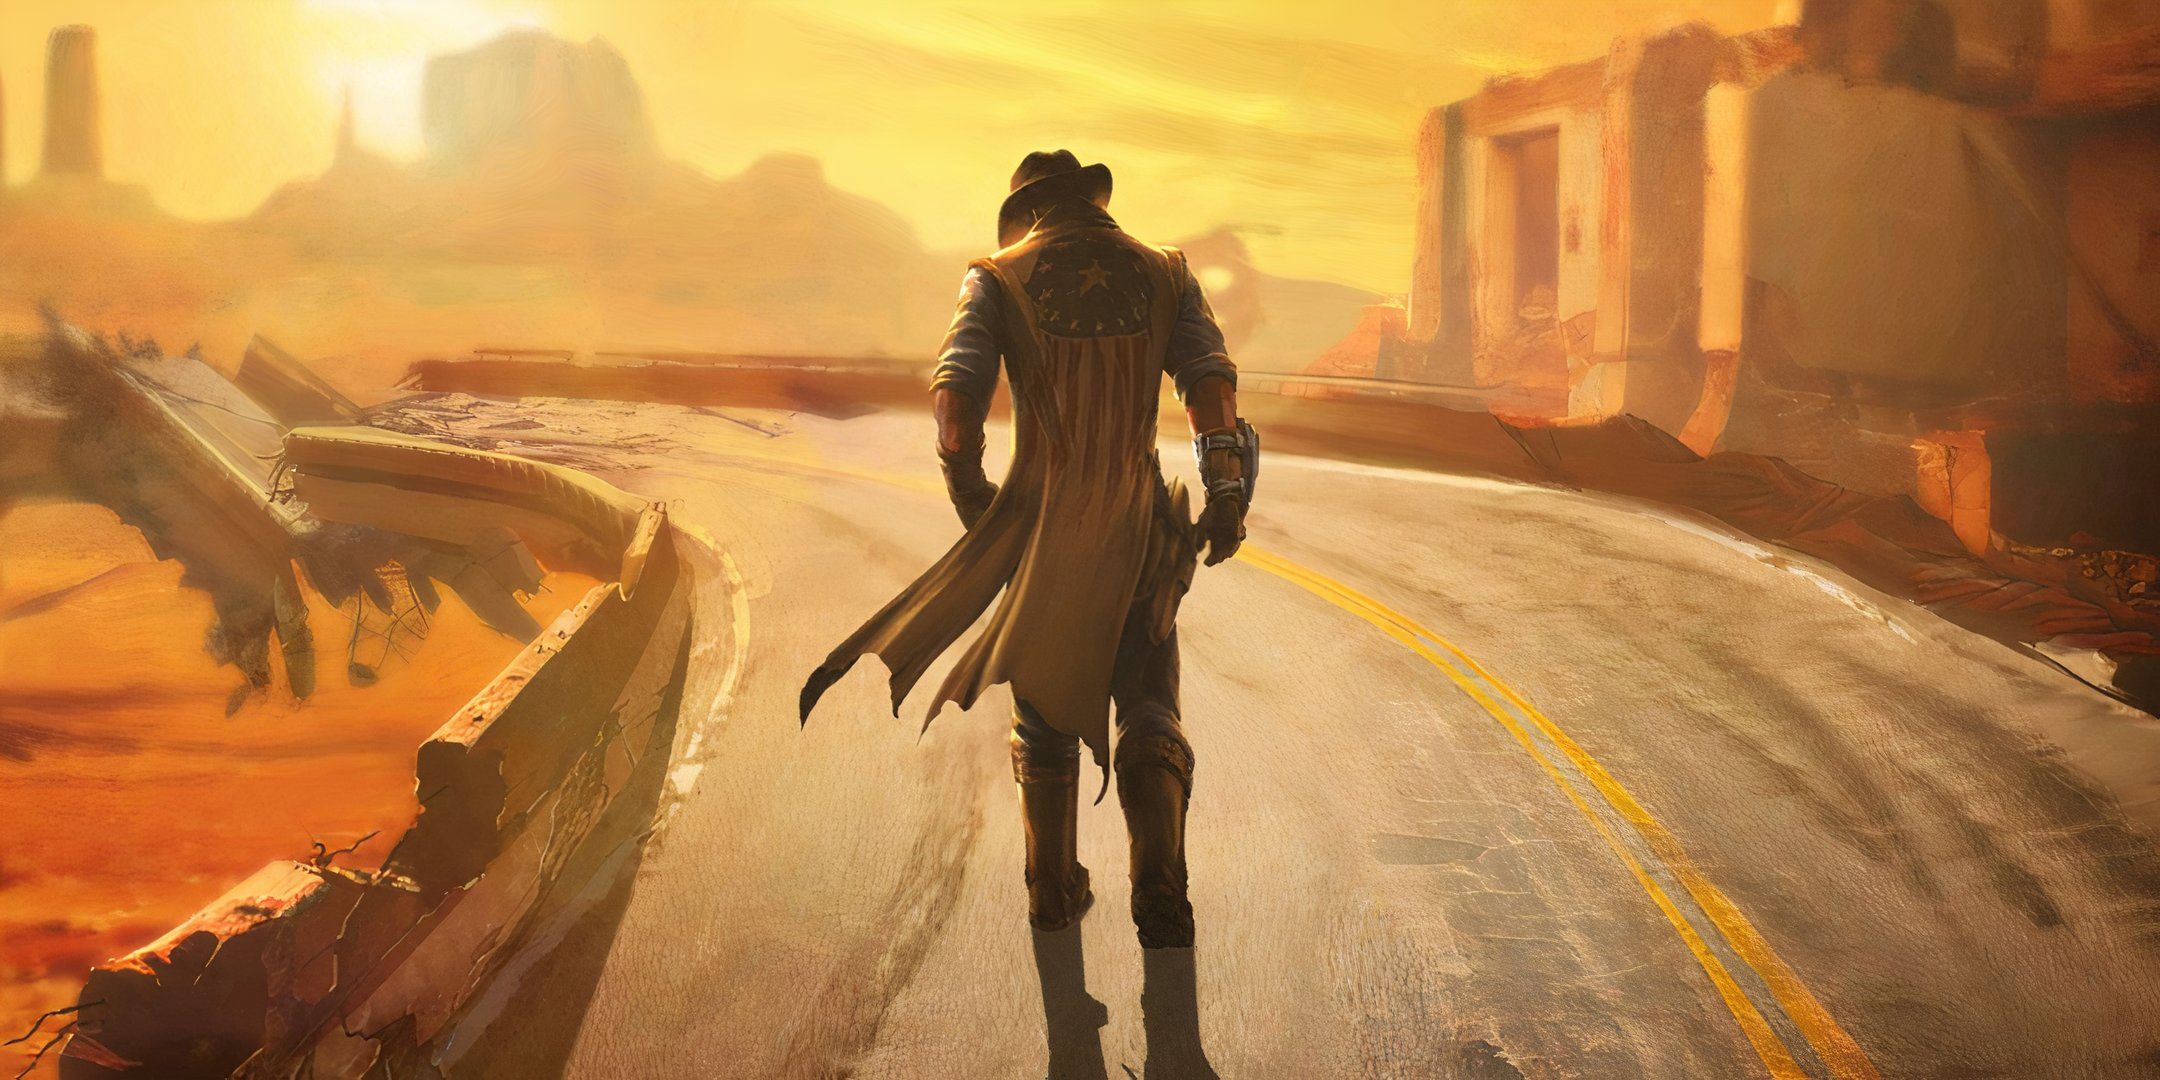 The courier from Fallout New Vegas walking down an empty, destroyed road